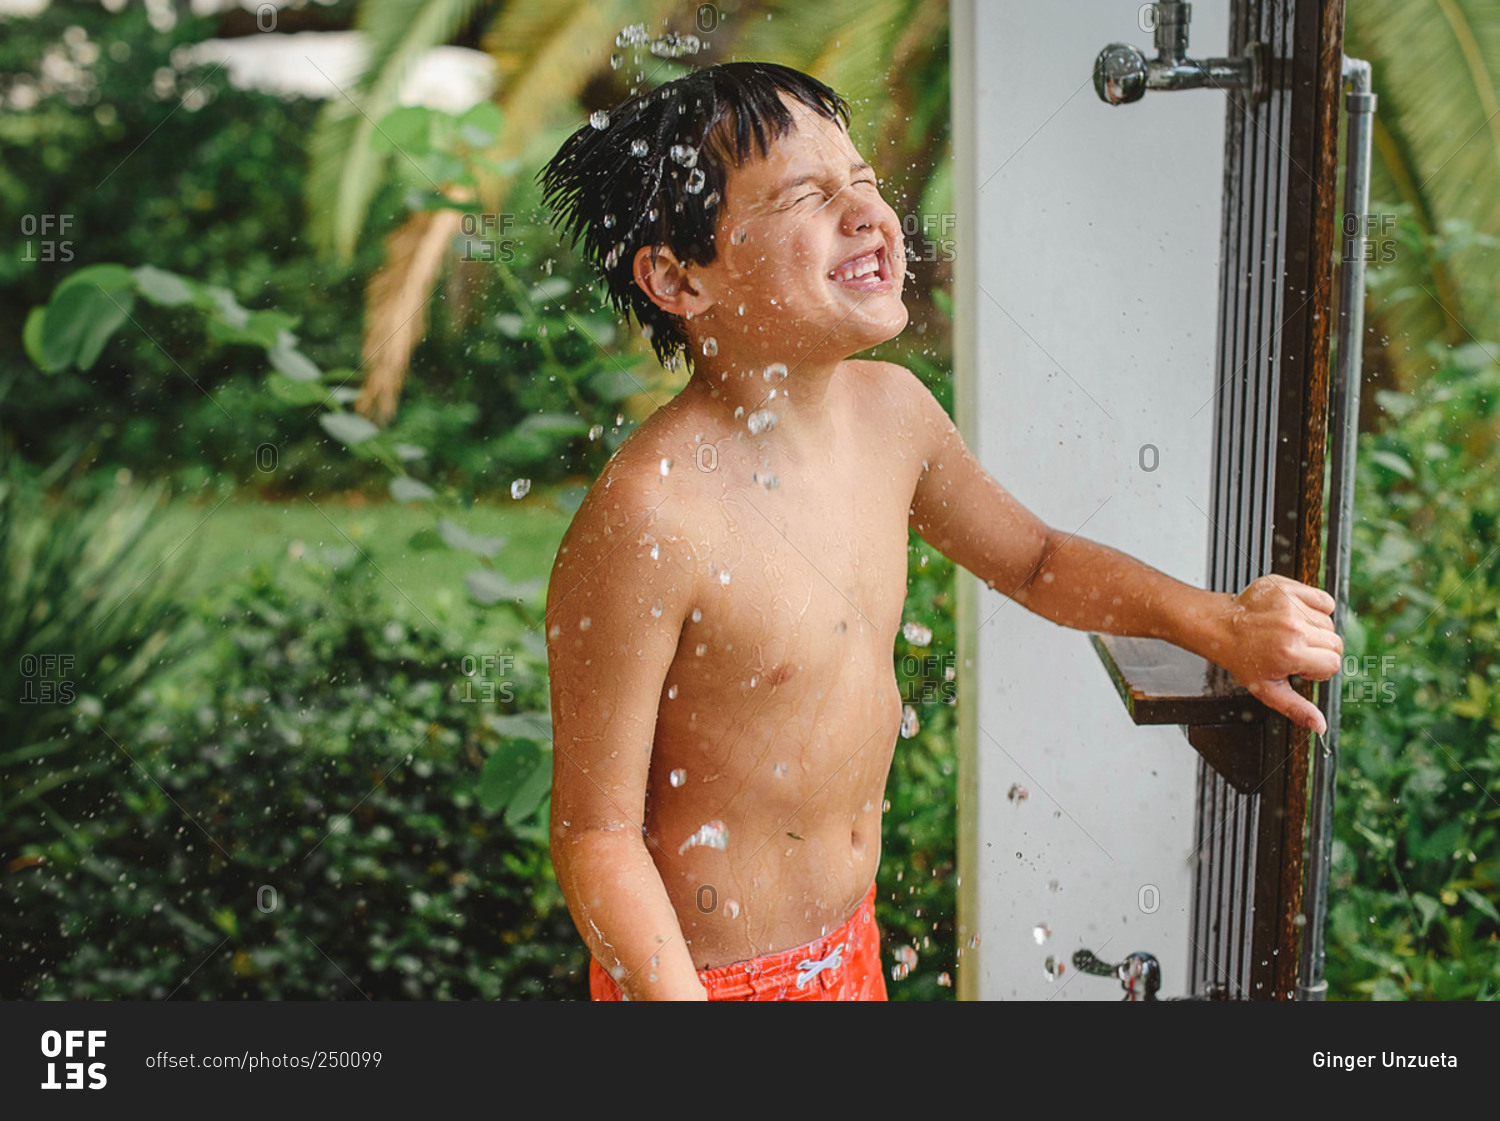 A boy smiles in an outdoor shower